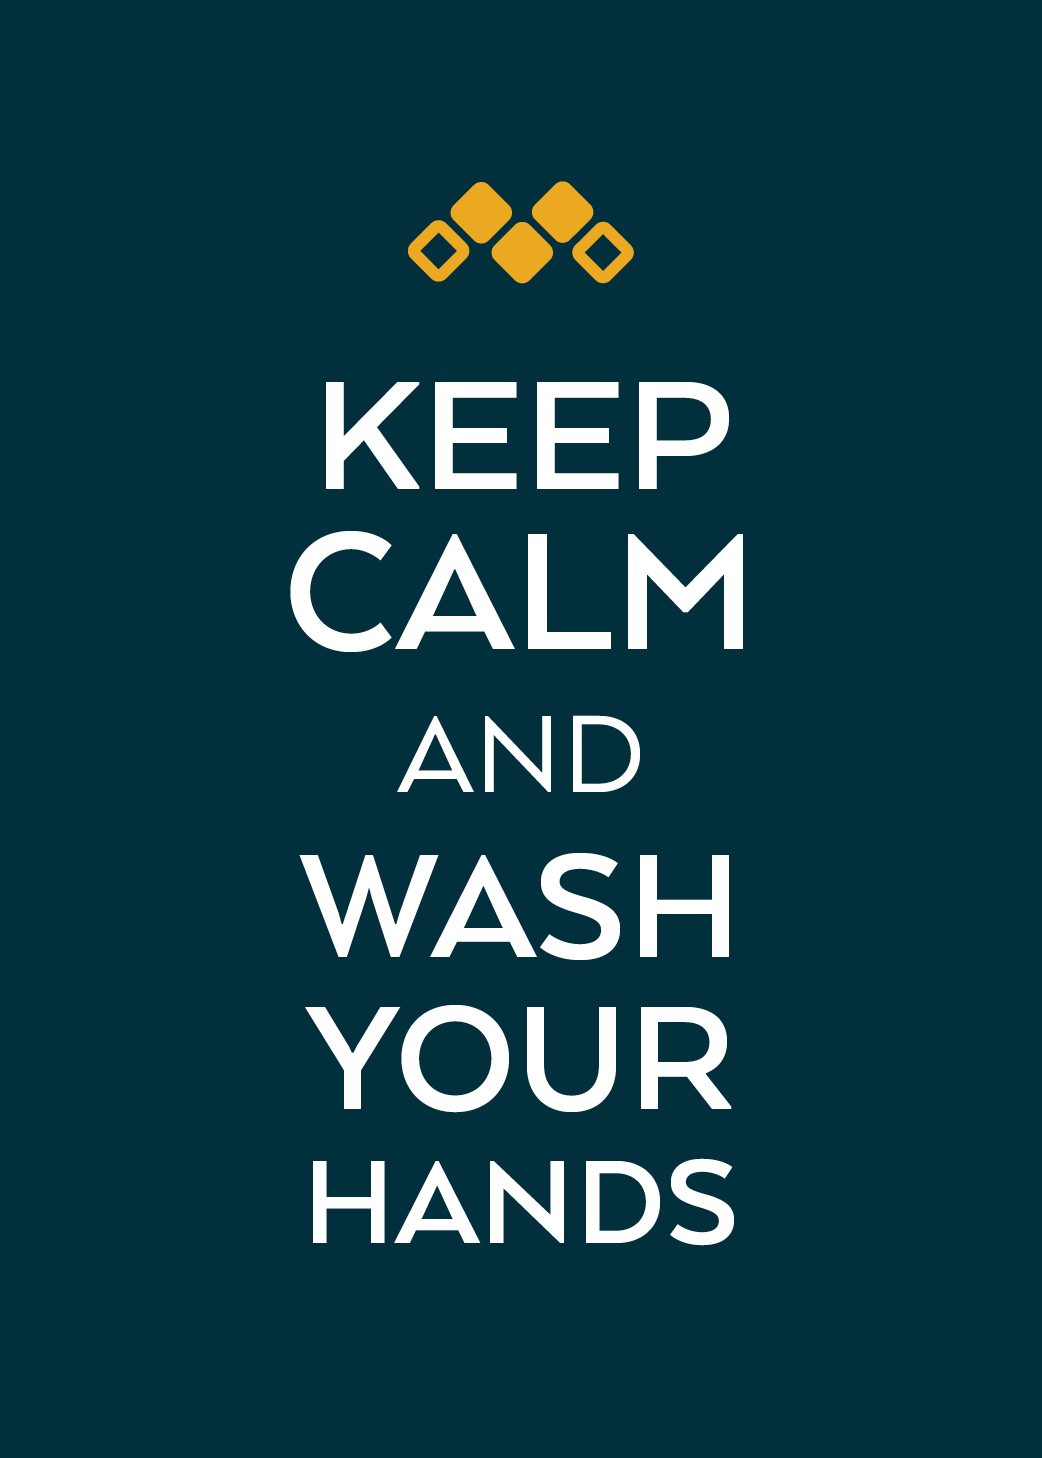 Keep calm - and wash your hands - Monument Health